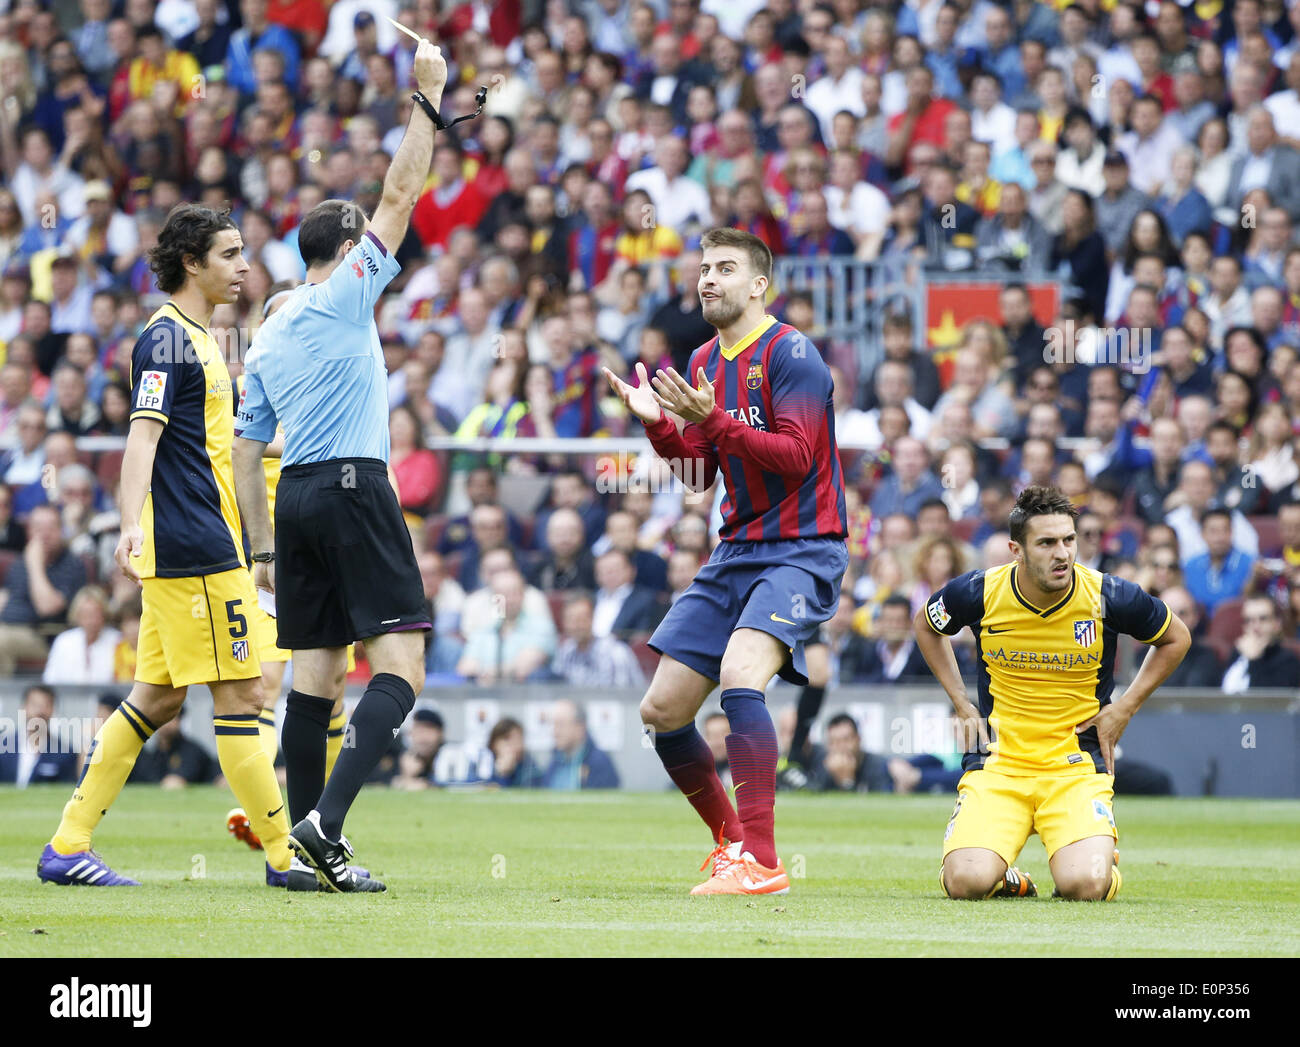 Barcelona, Spain. 17th May, 2014. Gerard Pique in the match between FC Barcelona and Atletico de Madrid, for Week 38 of the spanish Liga BBVA played at the Camp Nou, May 17, 2014. Photo: Joan Valls/Urbanandsport/Nurphoto. Credit:  Joan Valls/NurPhoto/ZUMAPRESS.com/Alamy Live News Stock Photo